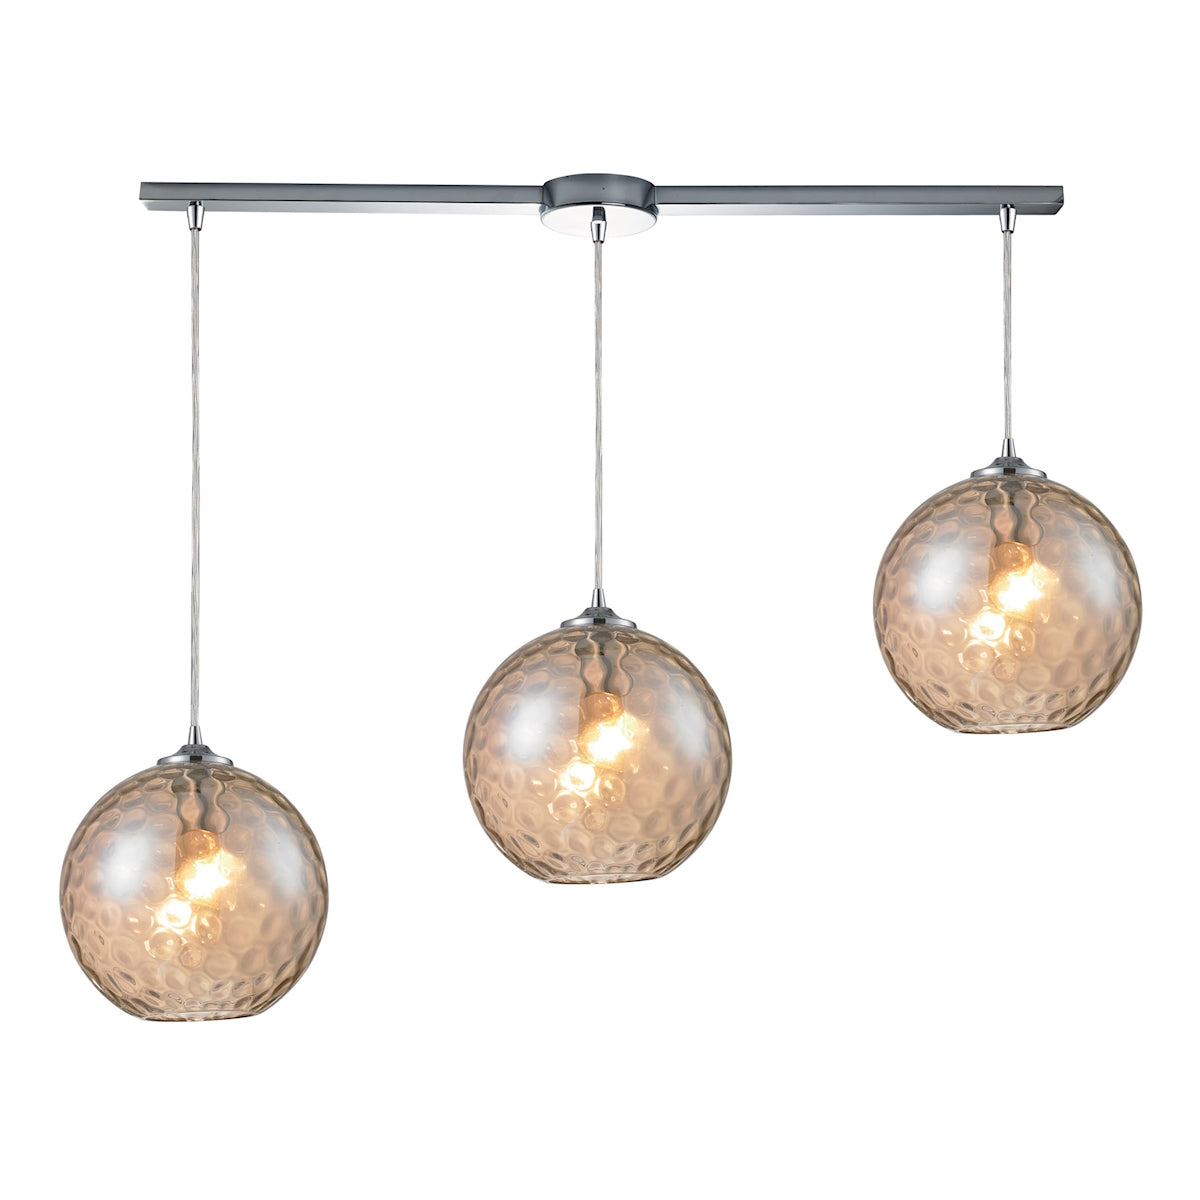 Watersphere 3-Light Linear Pendant Fixture in Chrome with Hammered Amber Glass